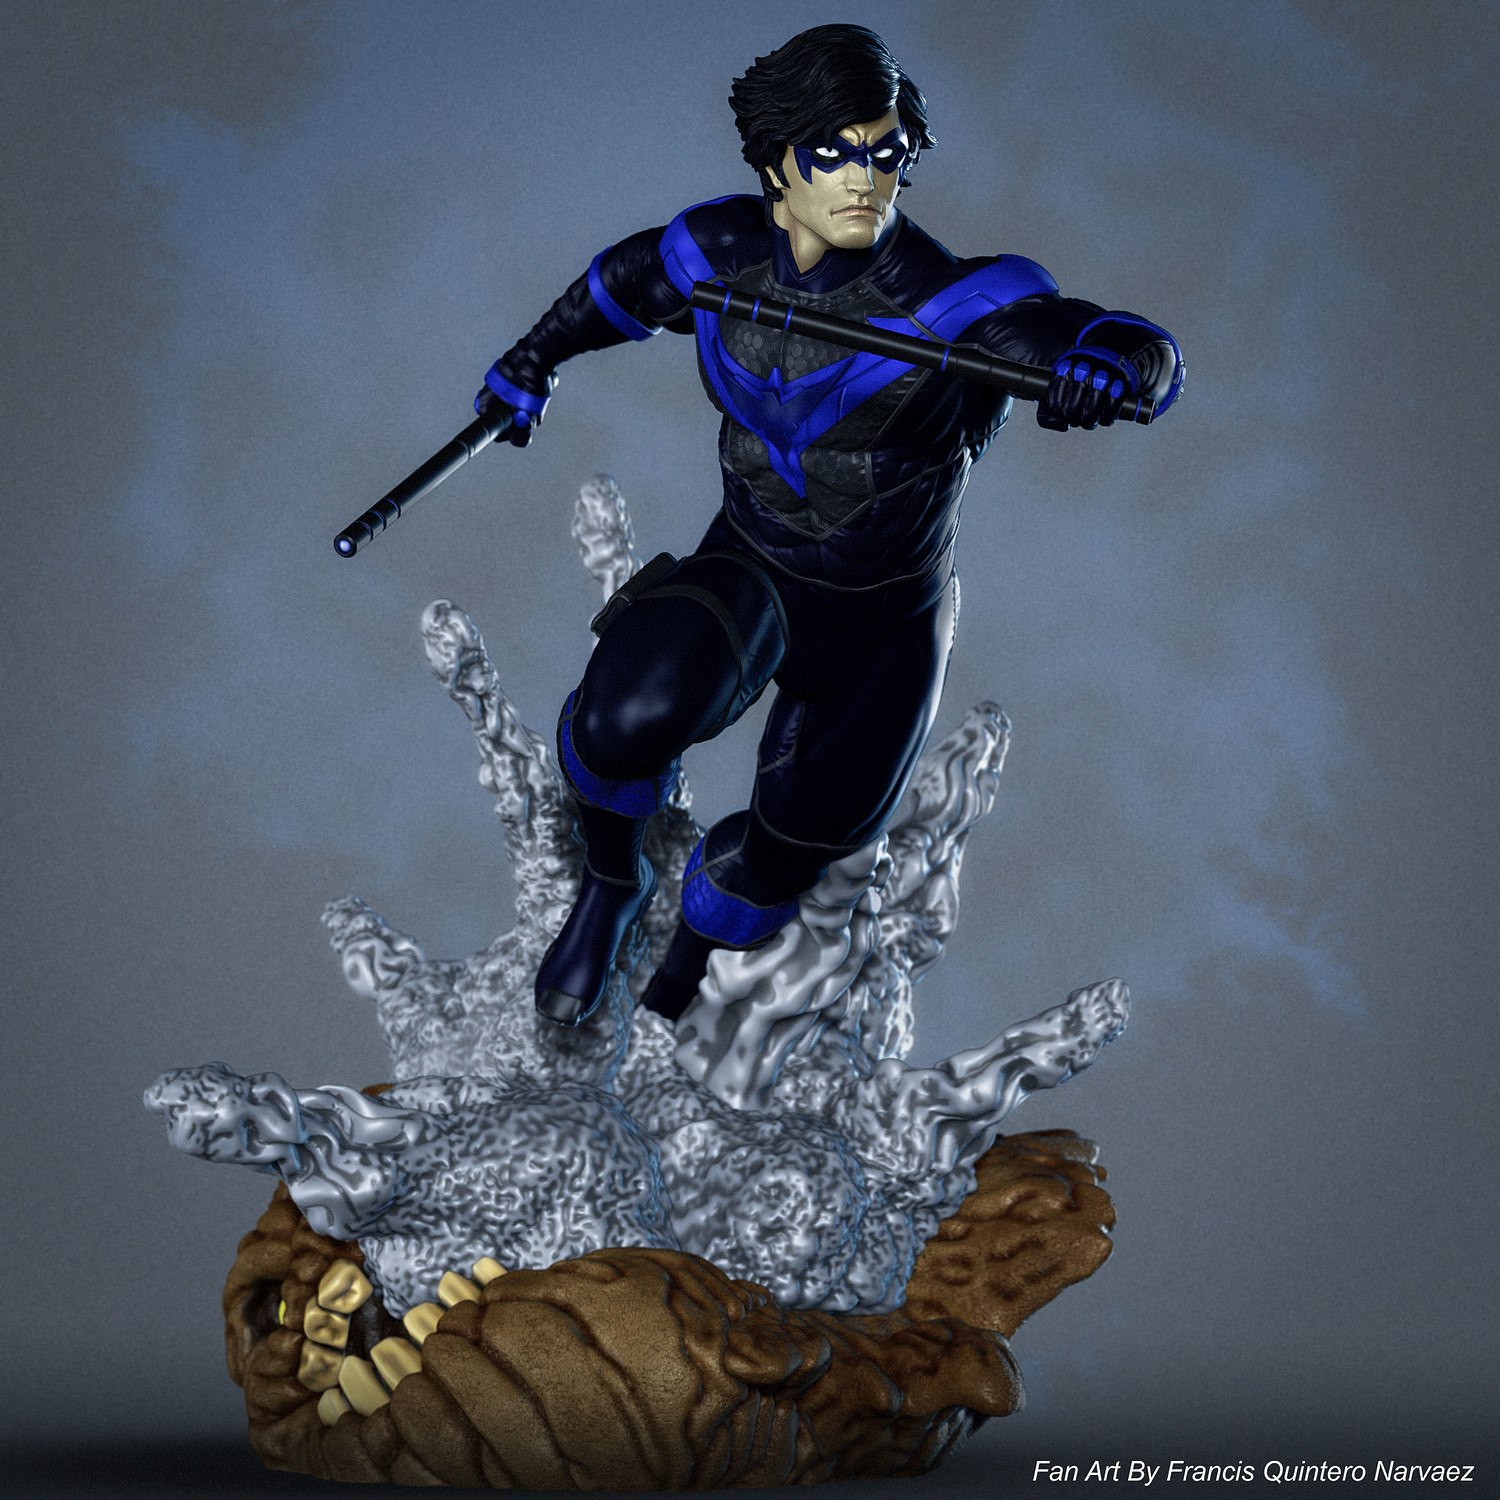 Nightwing from DC